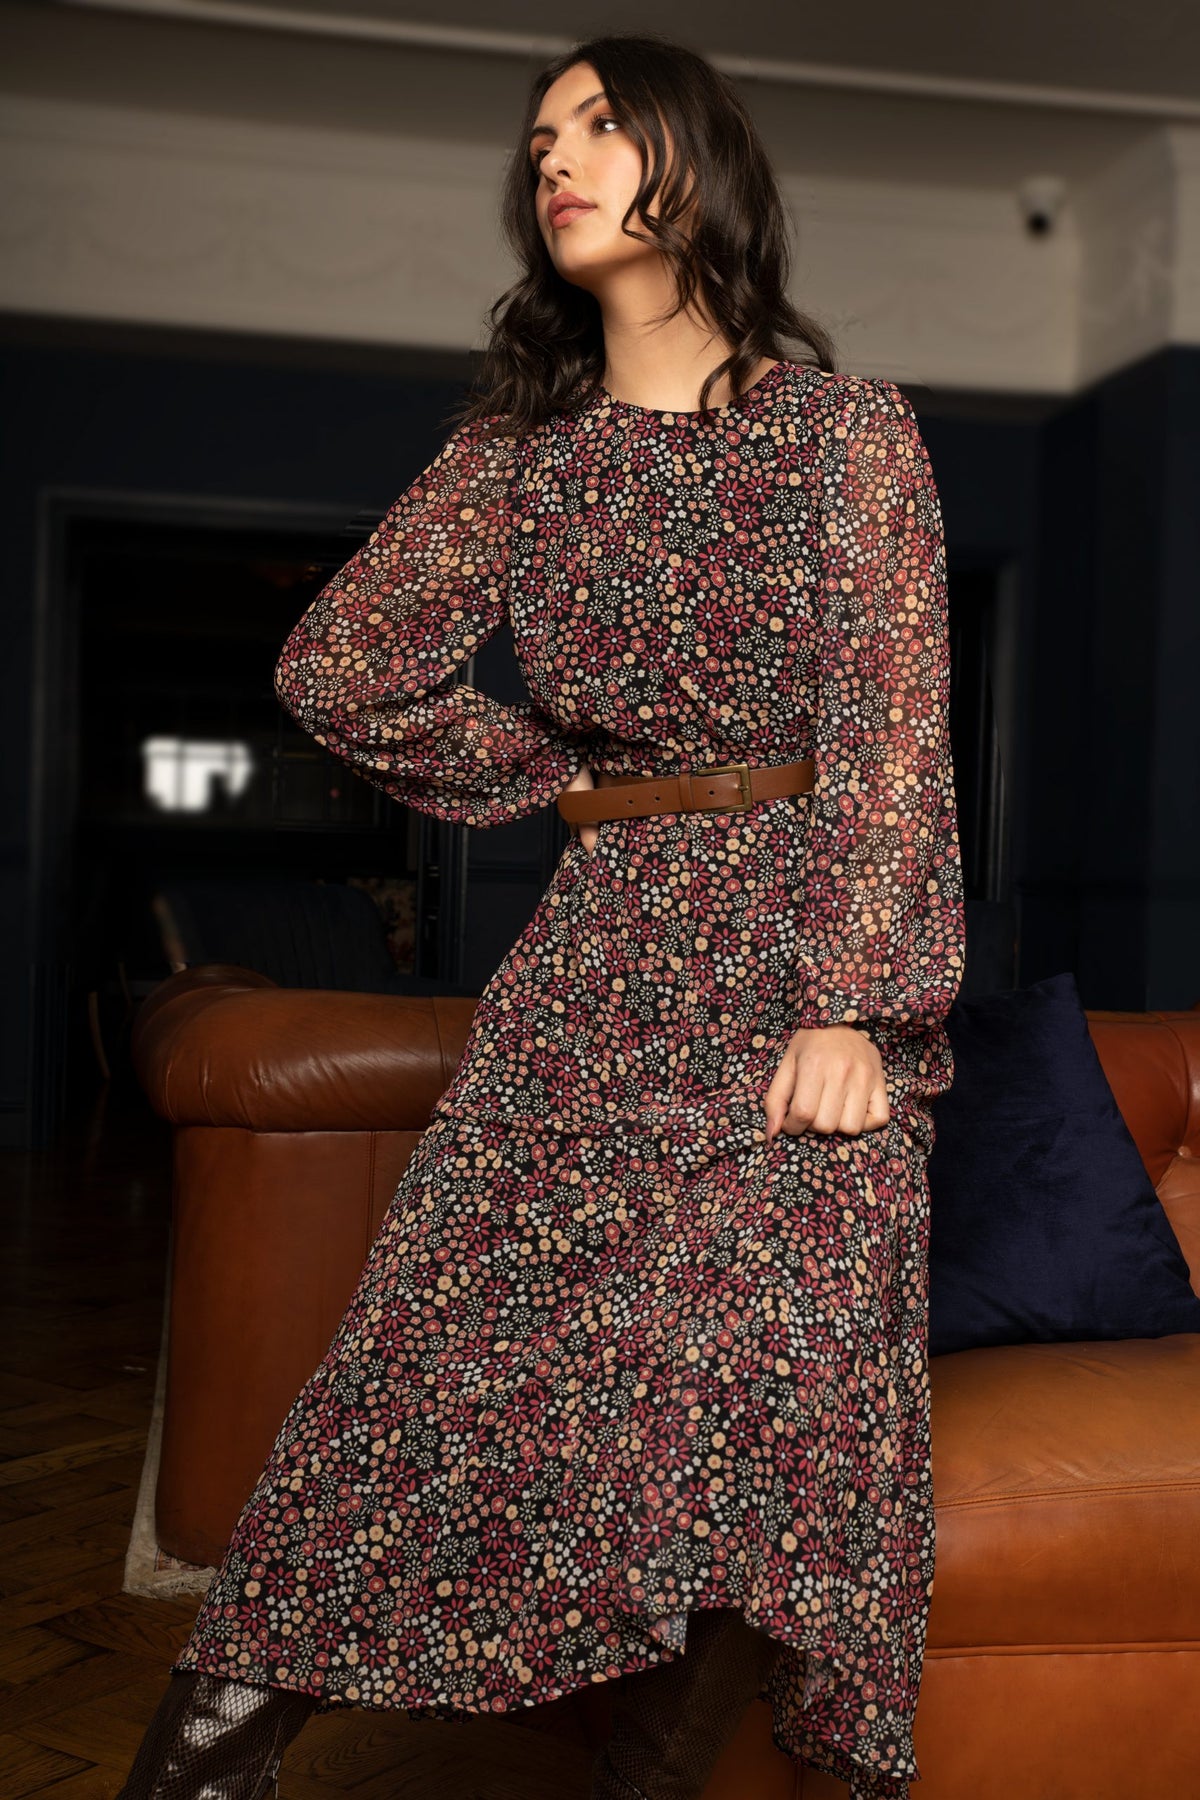 Annecy Ditsy Floral Printed Midi Dress